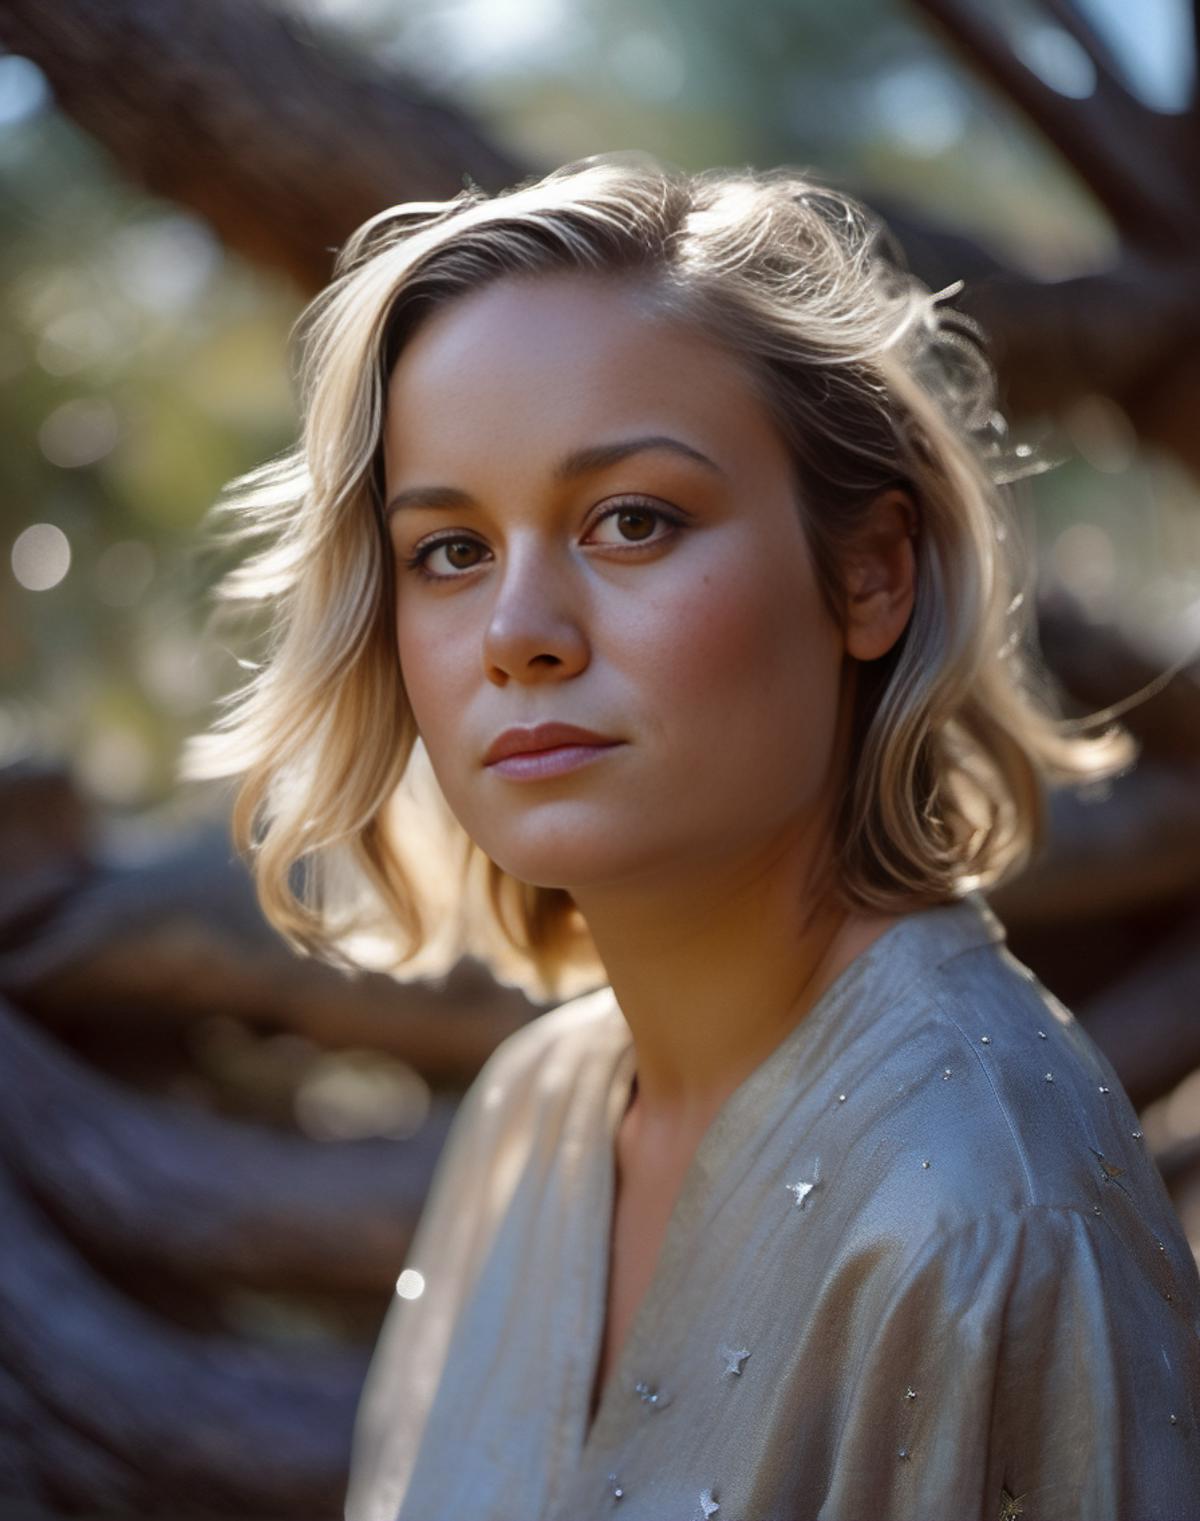 Brie Larson image by parar20